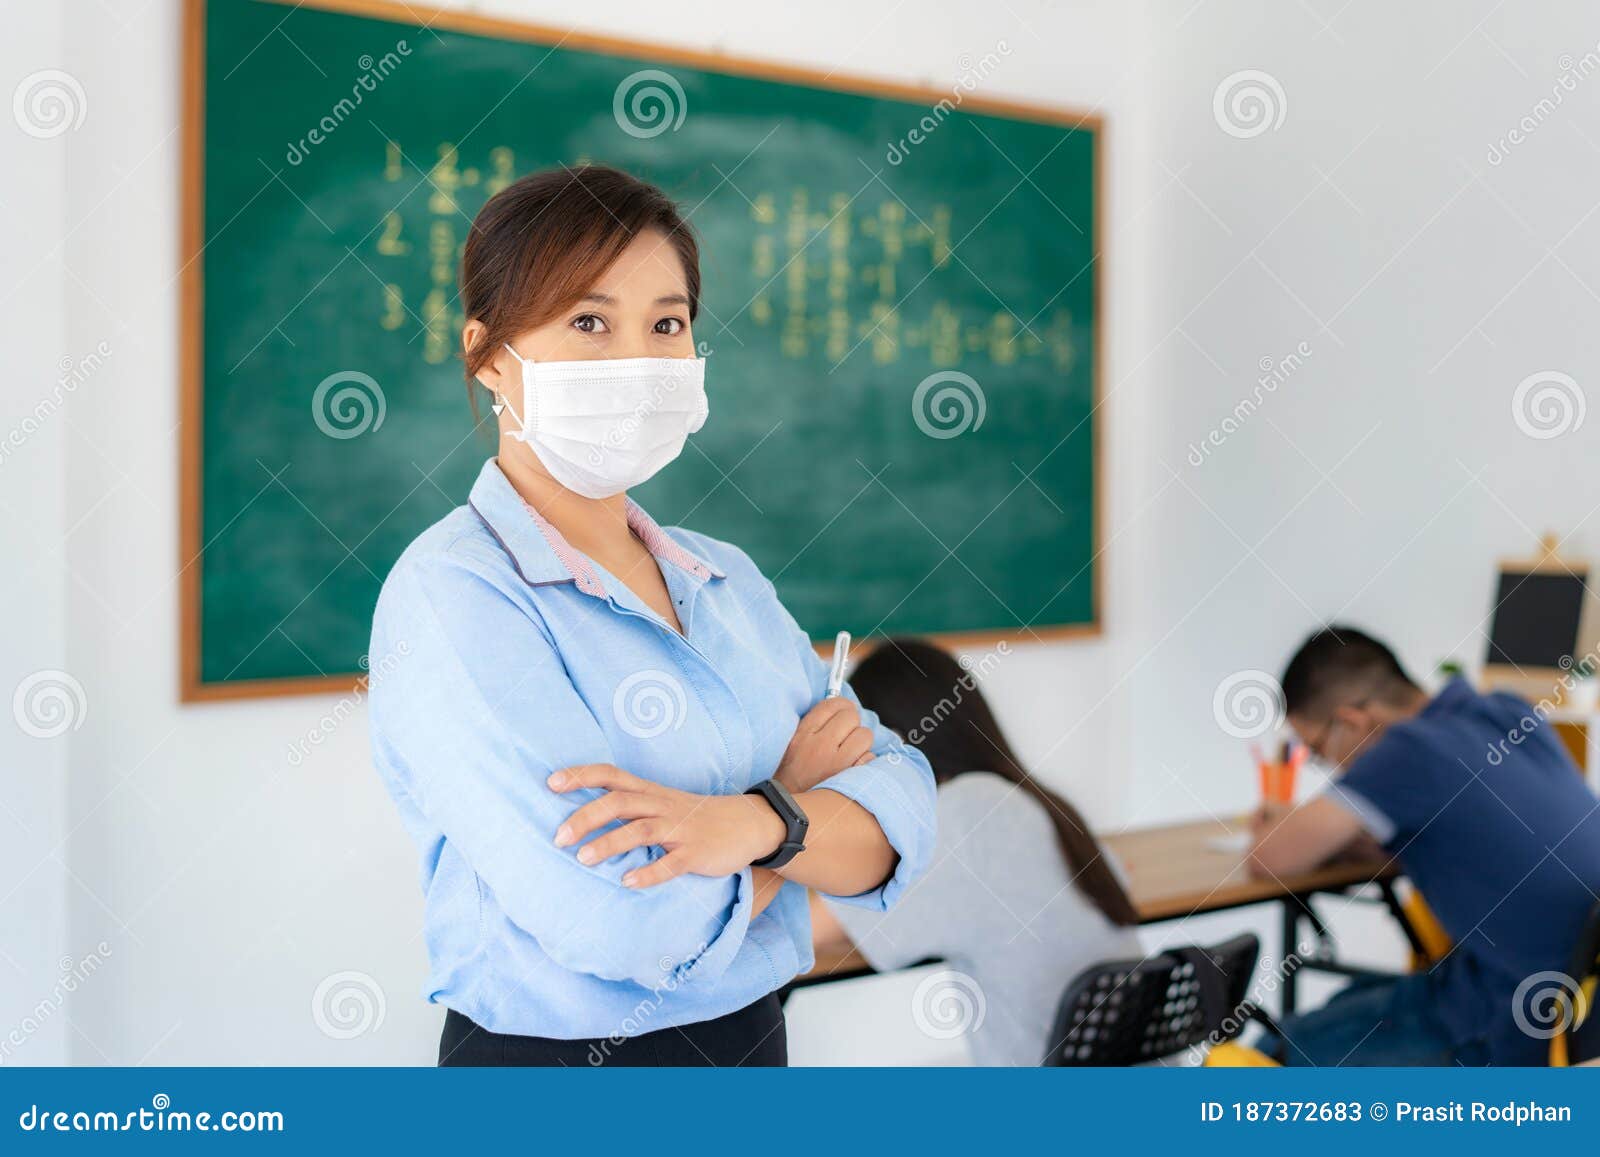 asian woman teacher wearing masks to prevent the outbreak of covid 19 in classroom with student while back to school reopen their